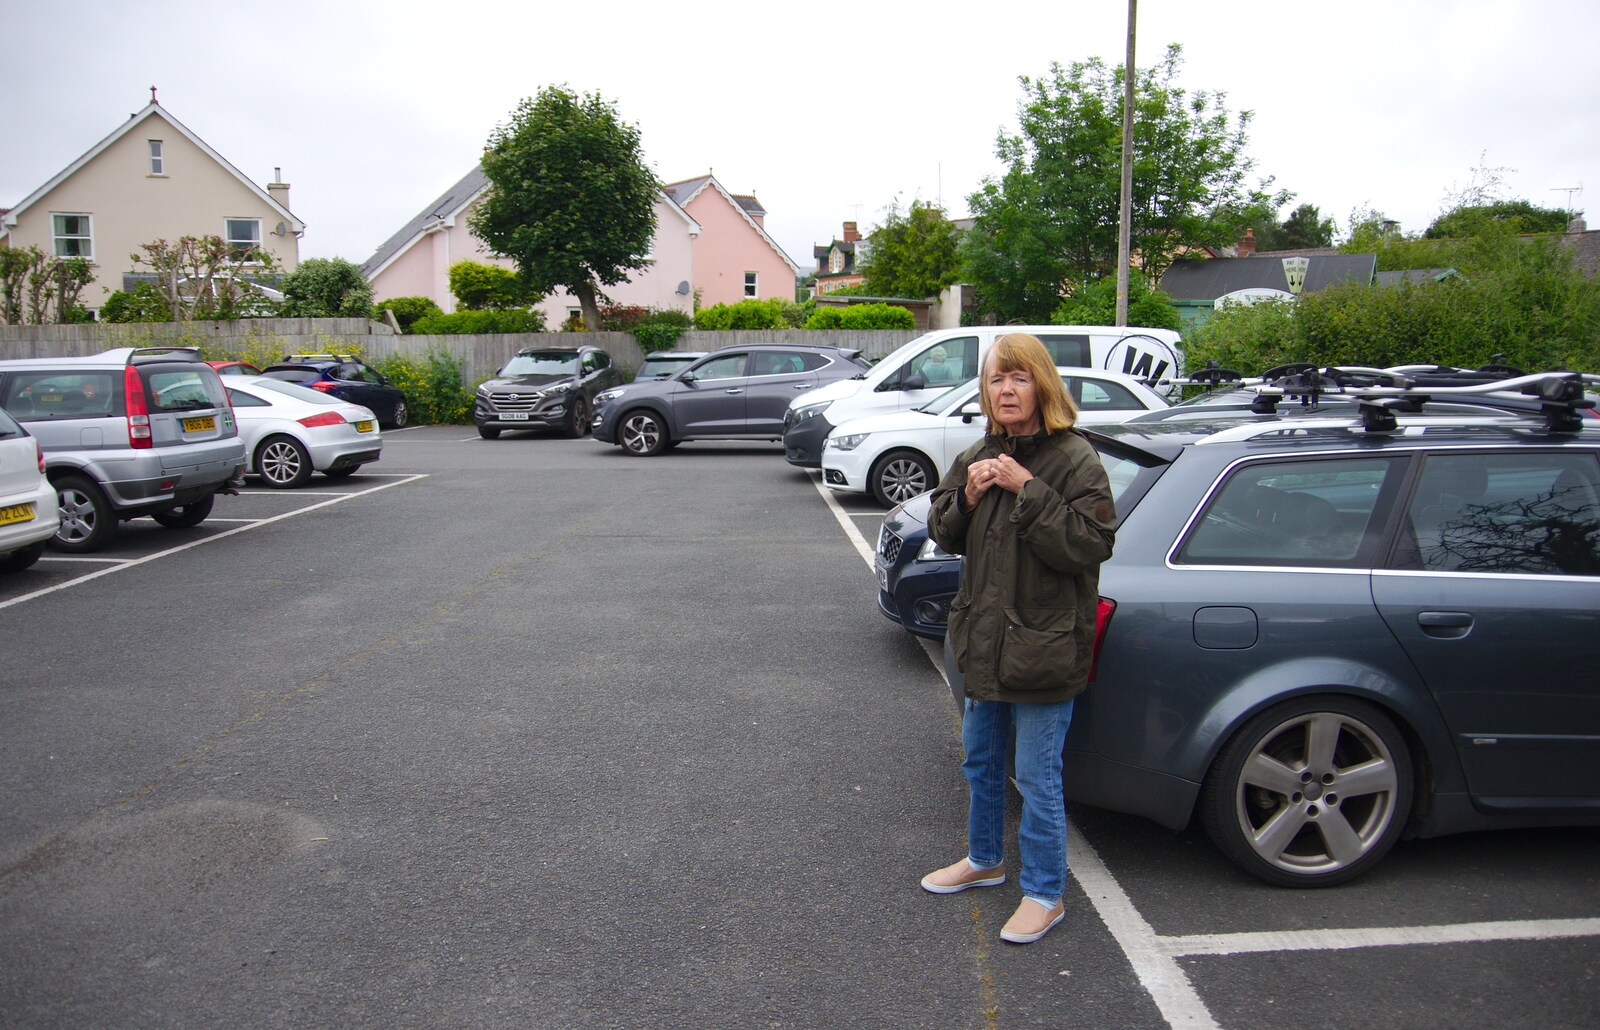 Mother looks worried in the car park at Bovey from The Tom Cobley and a Return to Haytor, Bovey Tracey, Devon - 27th May 2019